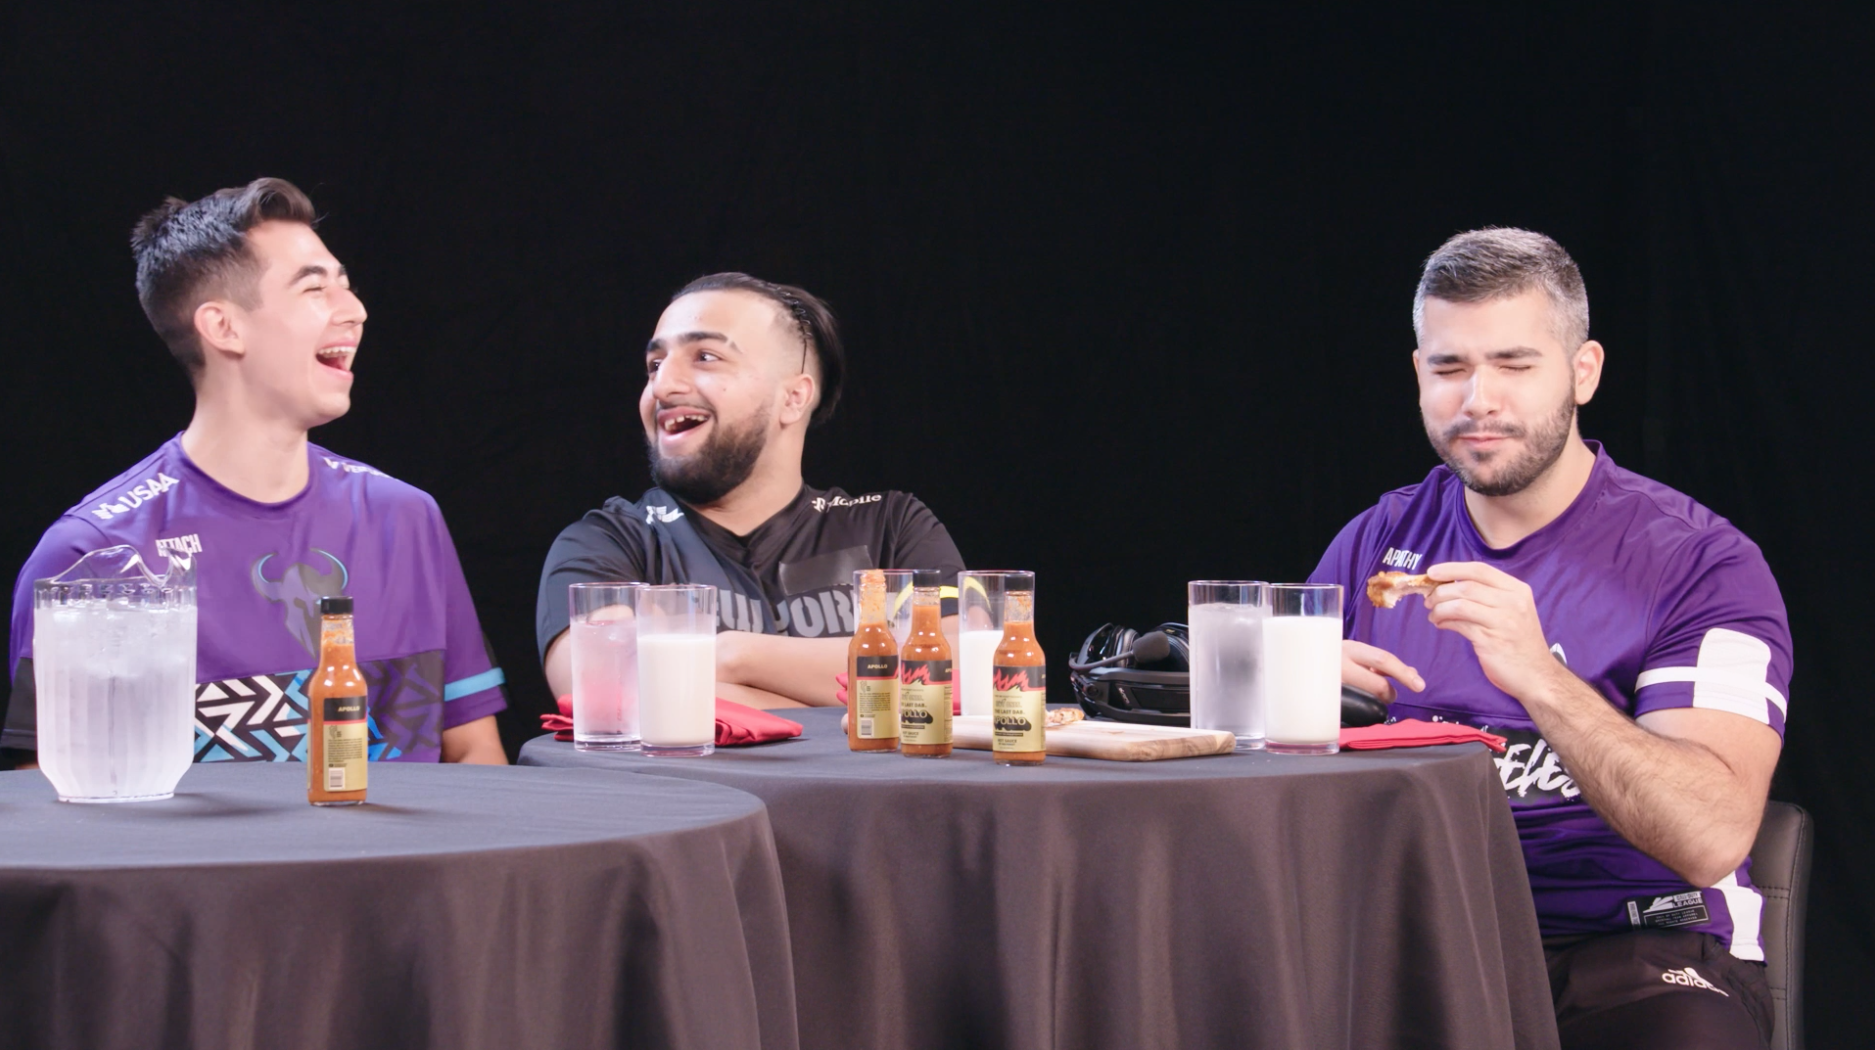 Pro ‘Call of Duty’ Players Put Their Skills to the Test in Hot Ones’ ‘Dab of Duty’